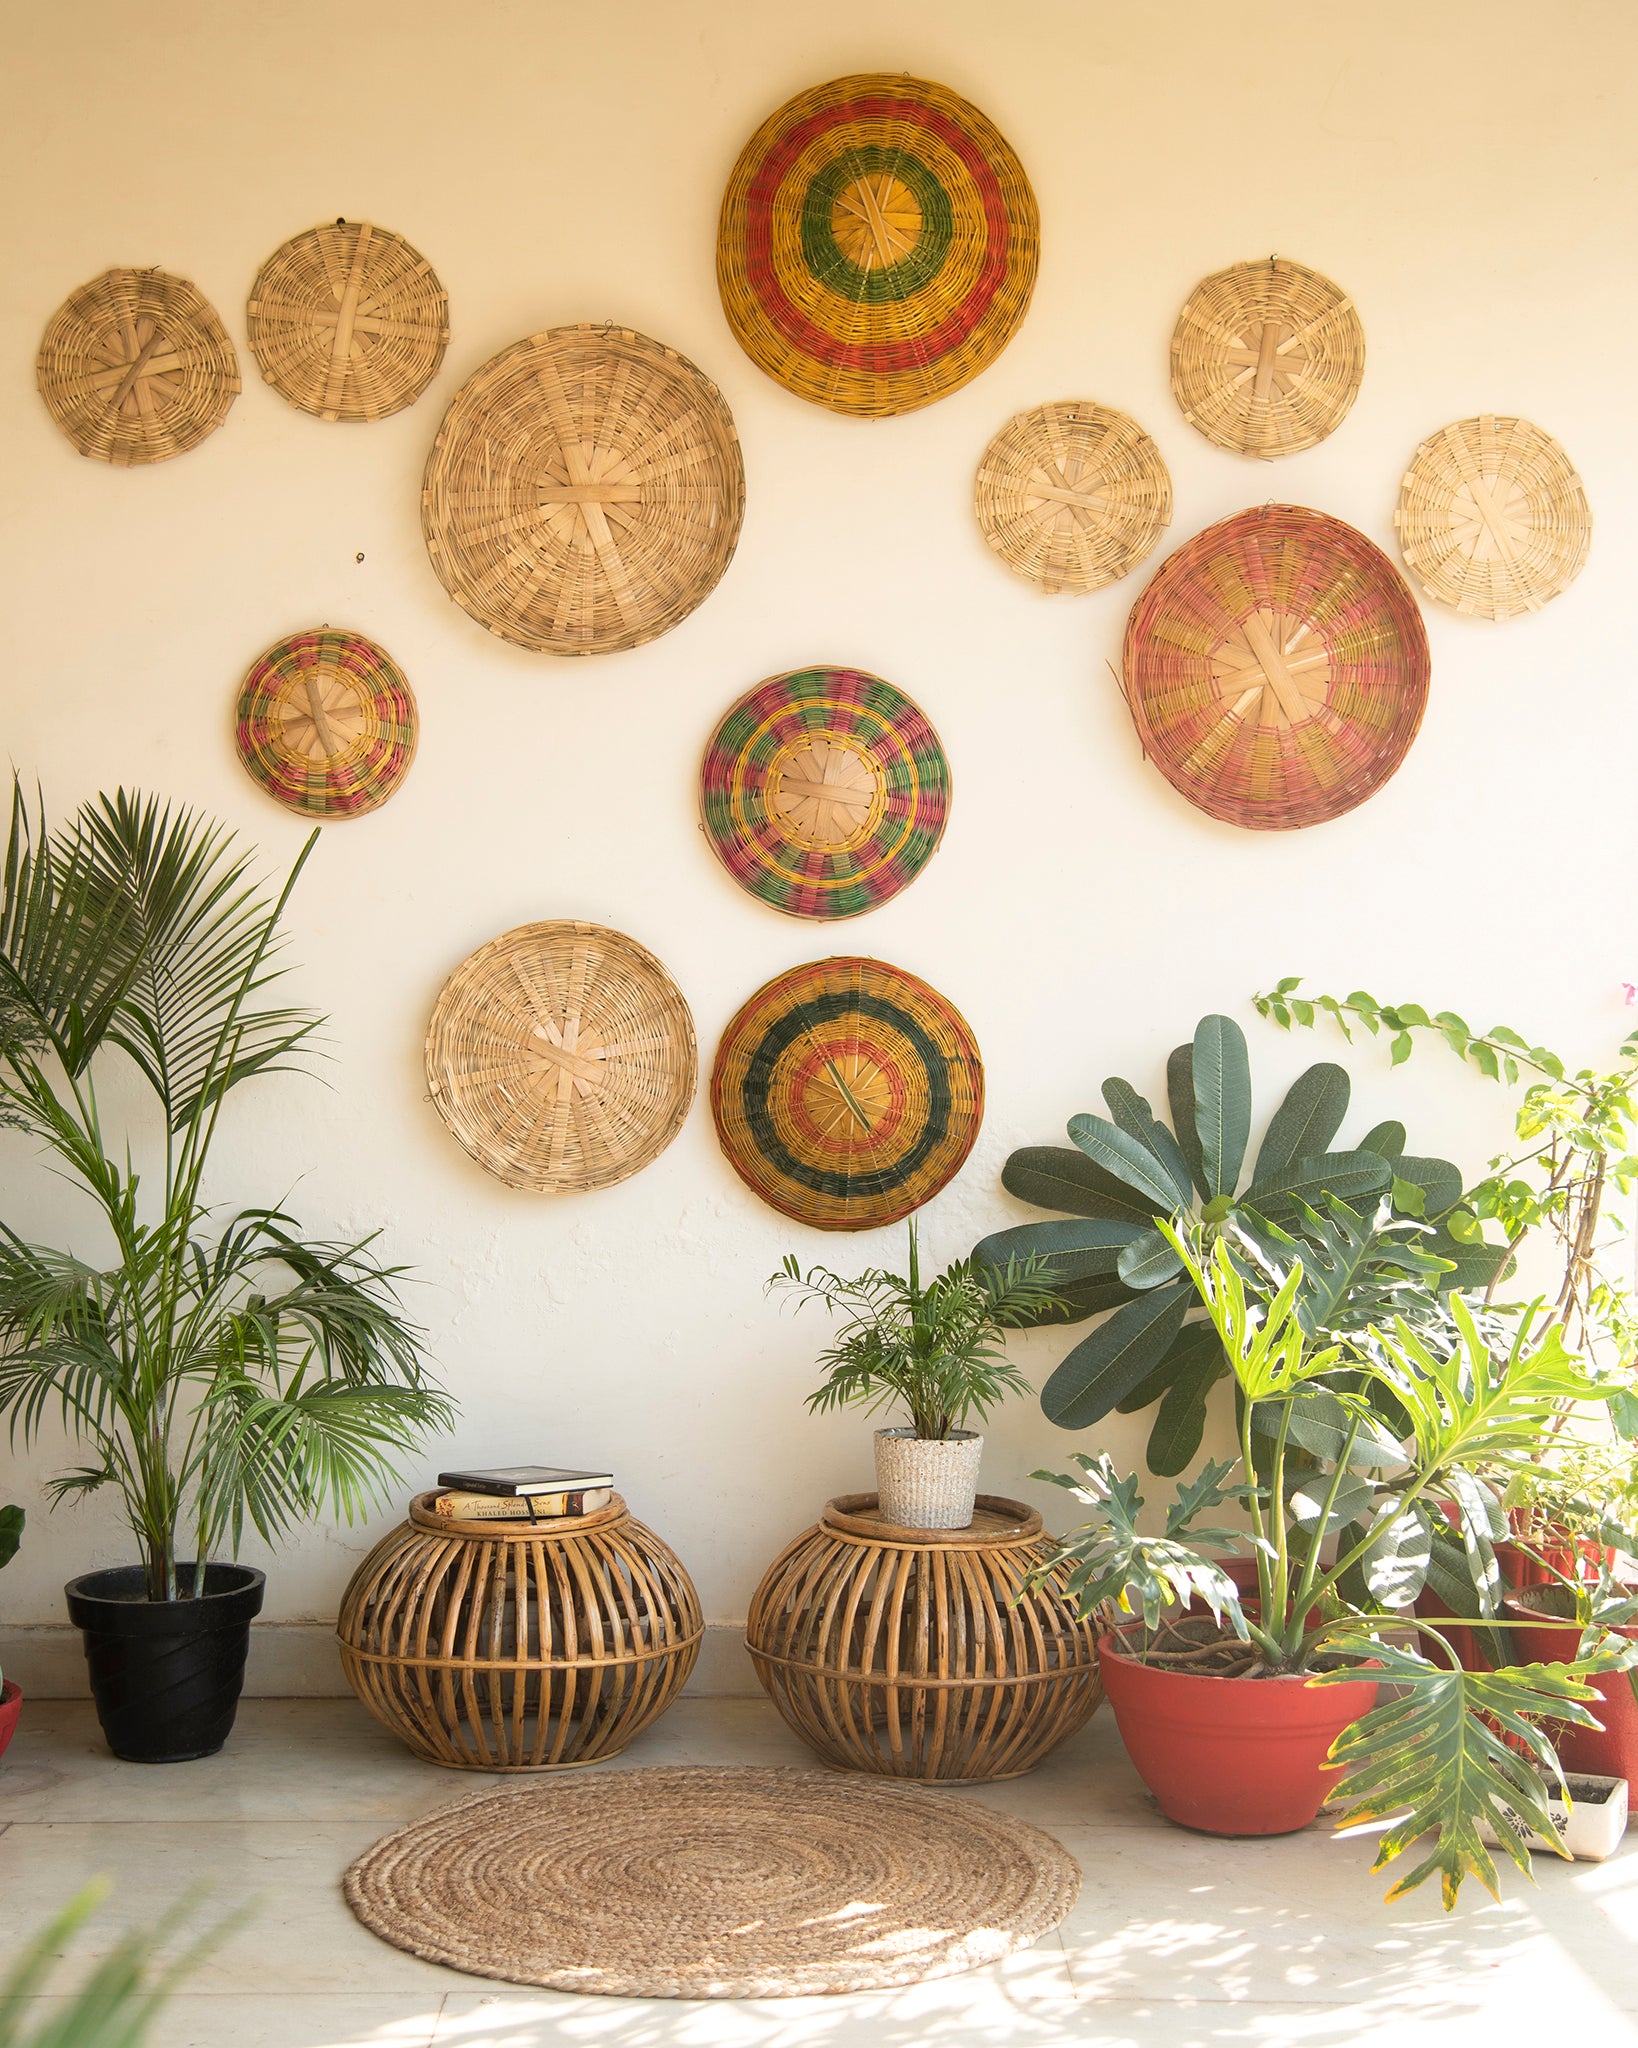 Bamboo Woven Wall Baskets - Set of 3. Bamboo woven wall baskets, Eco-friendly décor, Floral dyes, Handcrafted multi-utility baskets, Handmade bamboo basket plate, Handwoven bamboo wall hanging, Hooks for hanging, Organic colors, Sturdy craftsmanship, Sustainable home choices, Vibrant aesthetic, Wall decorator, Weave design, tesu 